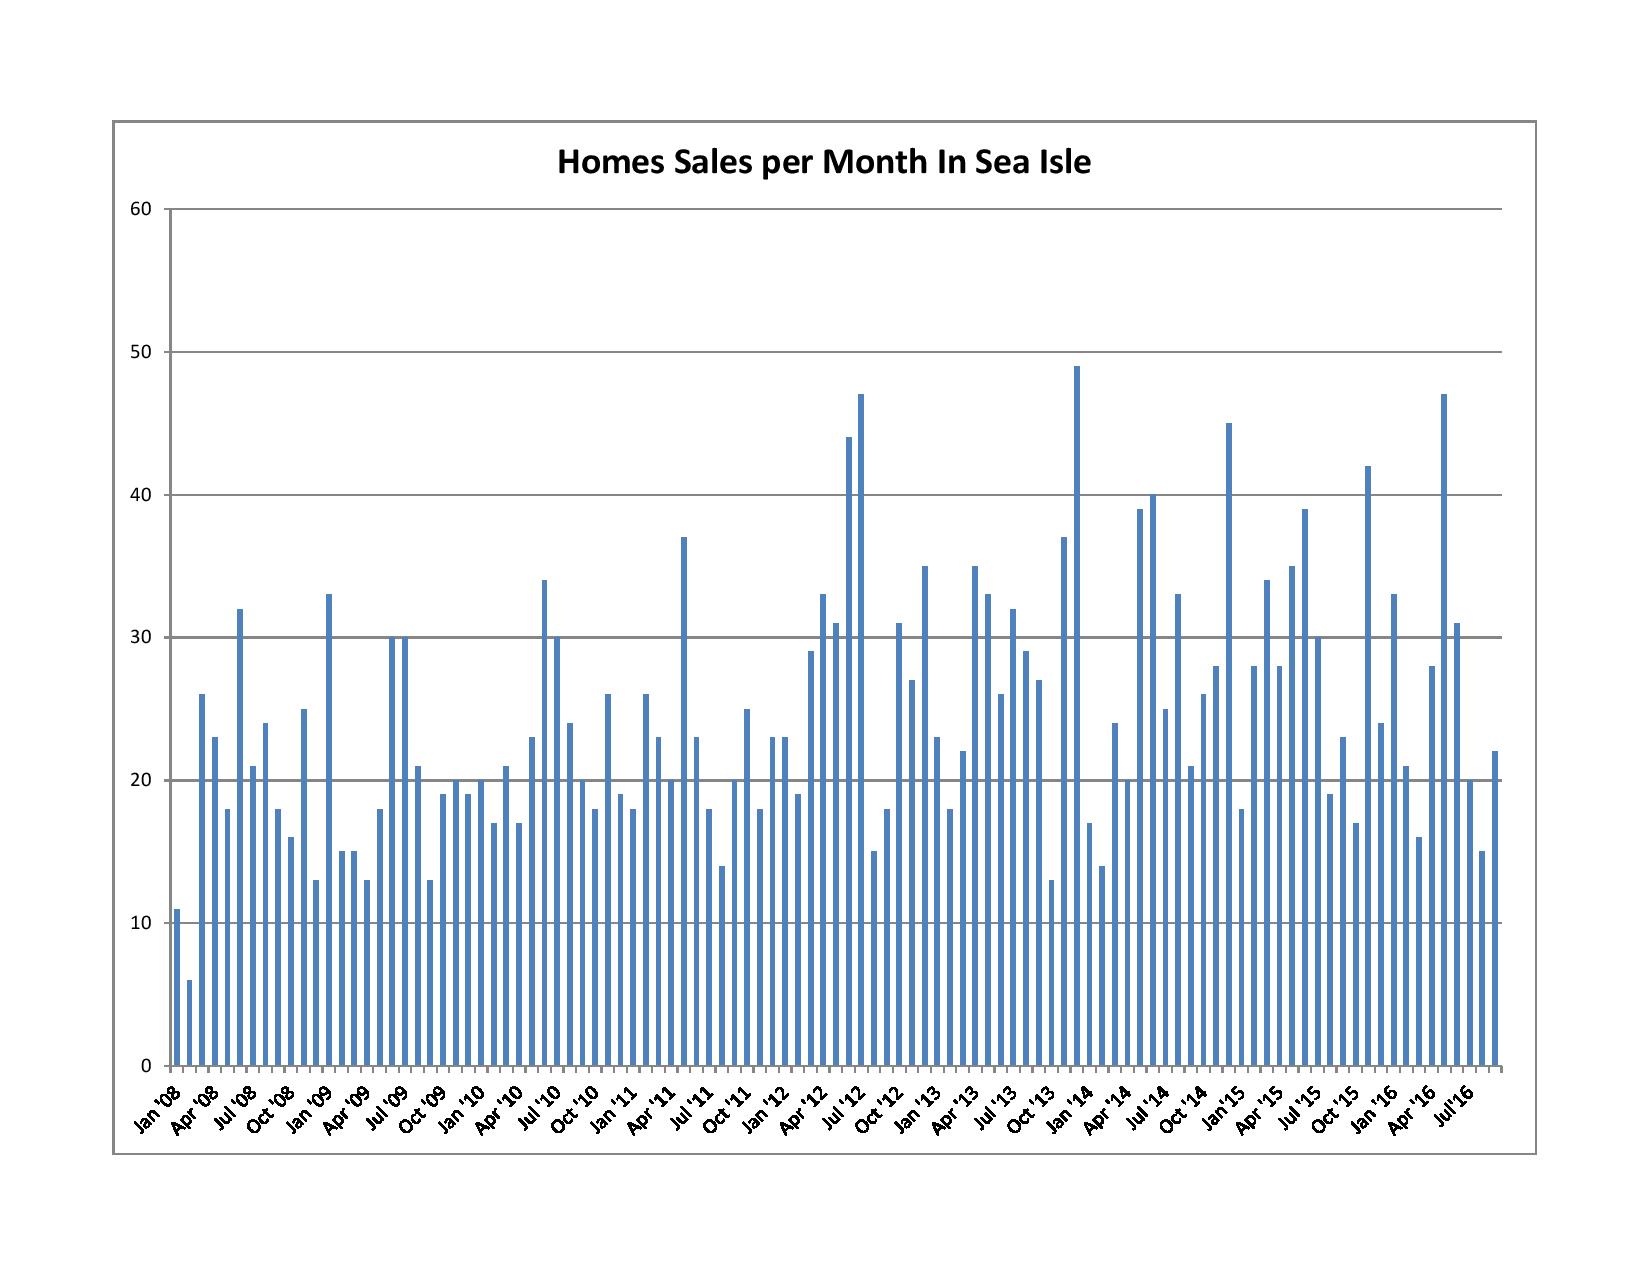 Homes Sold per Month in Sea Isle